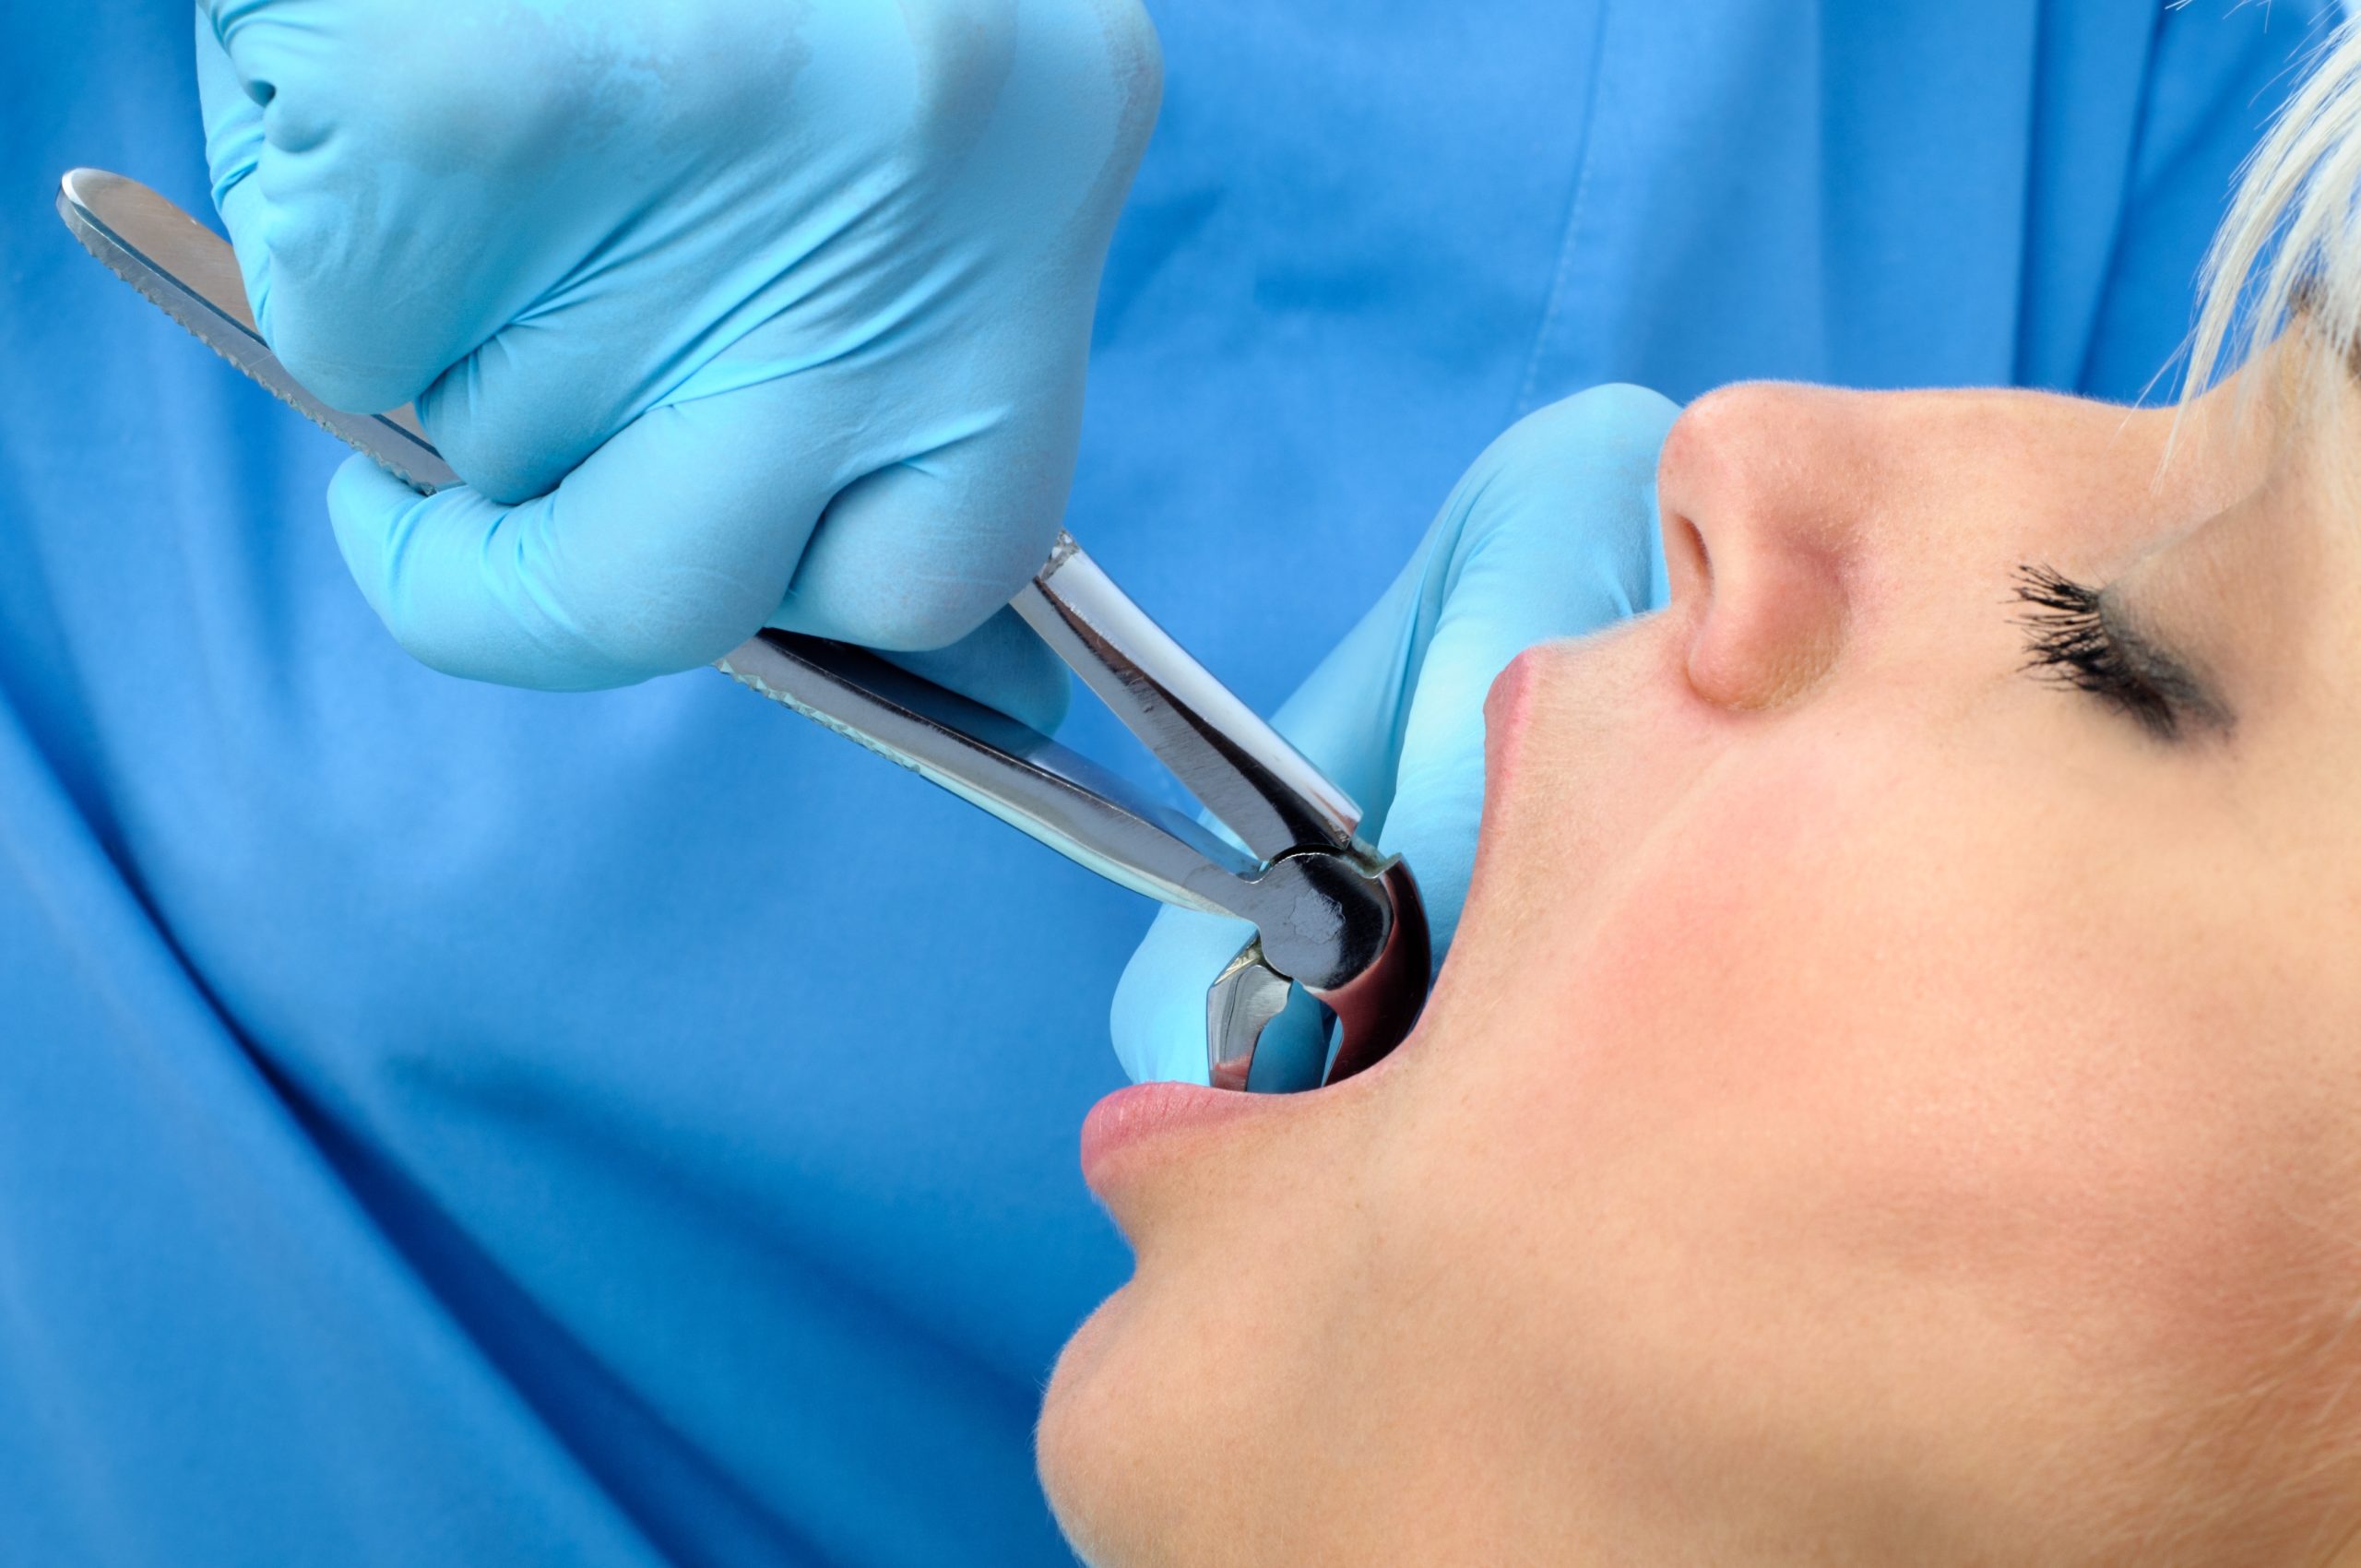 Tooth implant surgery in a North York dentistry